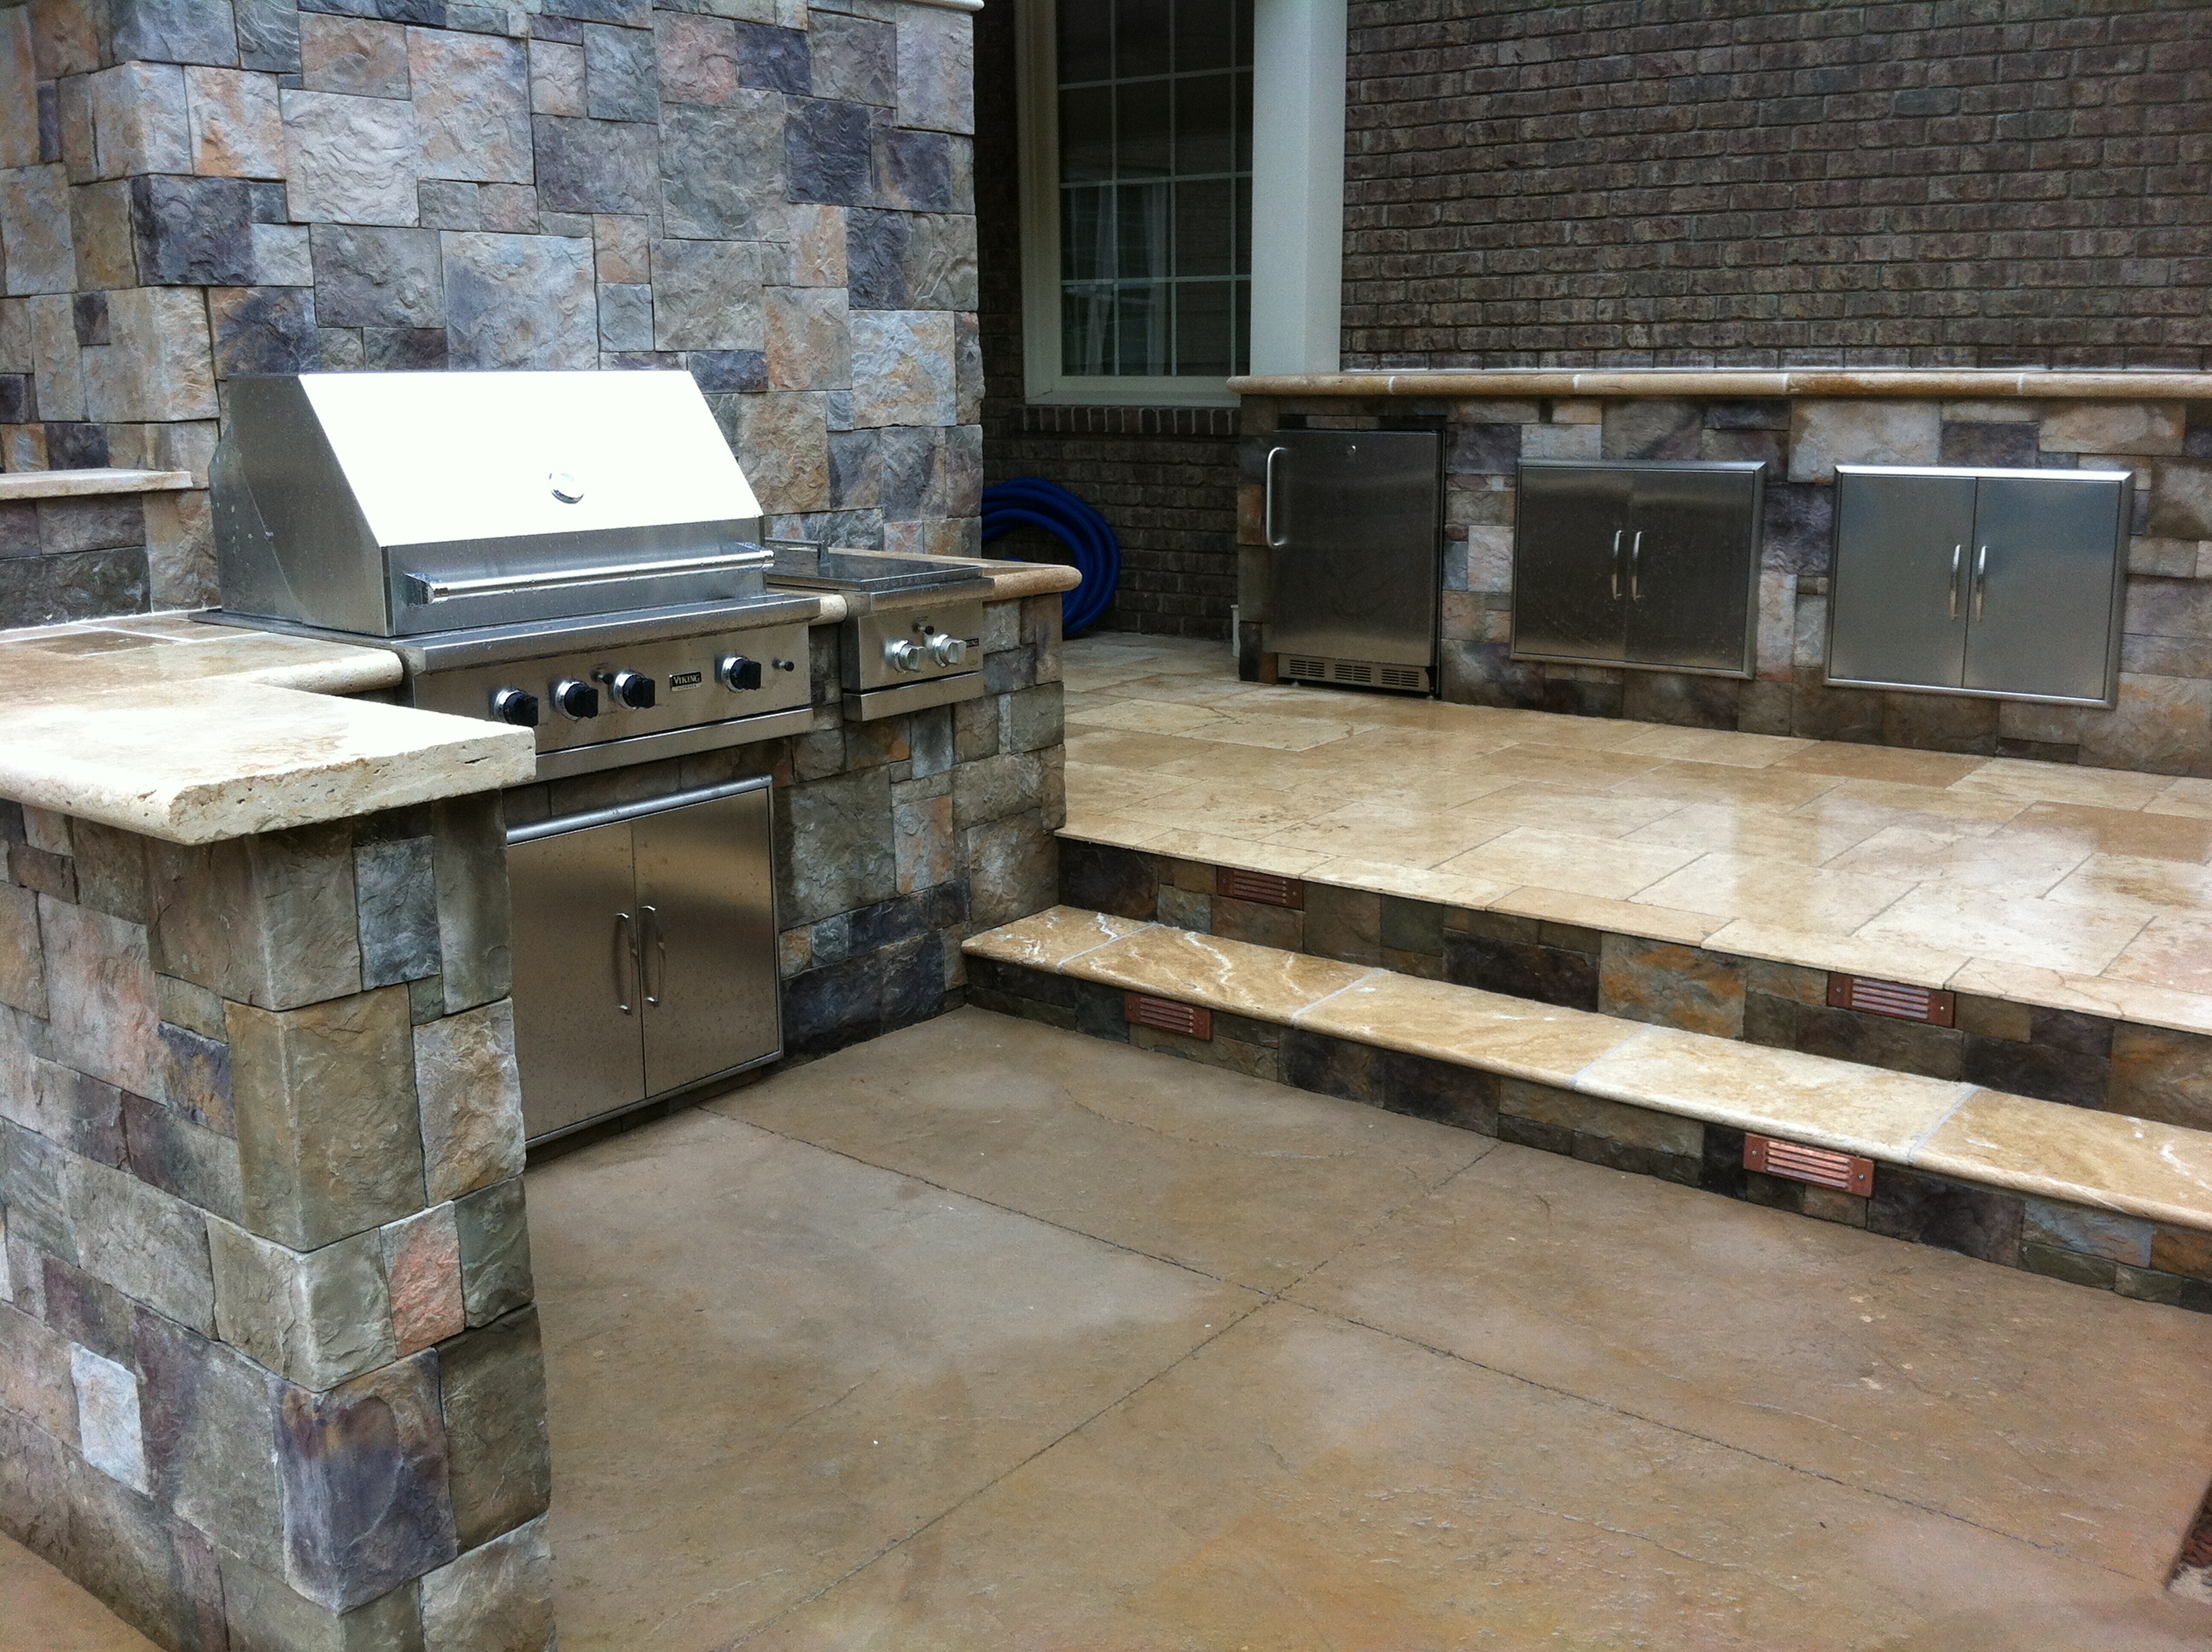 Raleigh NC Landscaping Pictures: Outdoor Kitchen Photos: Landvision